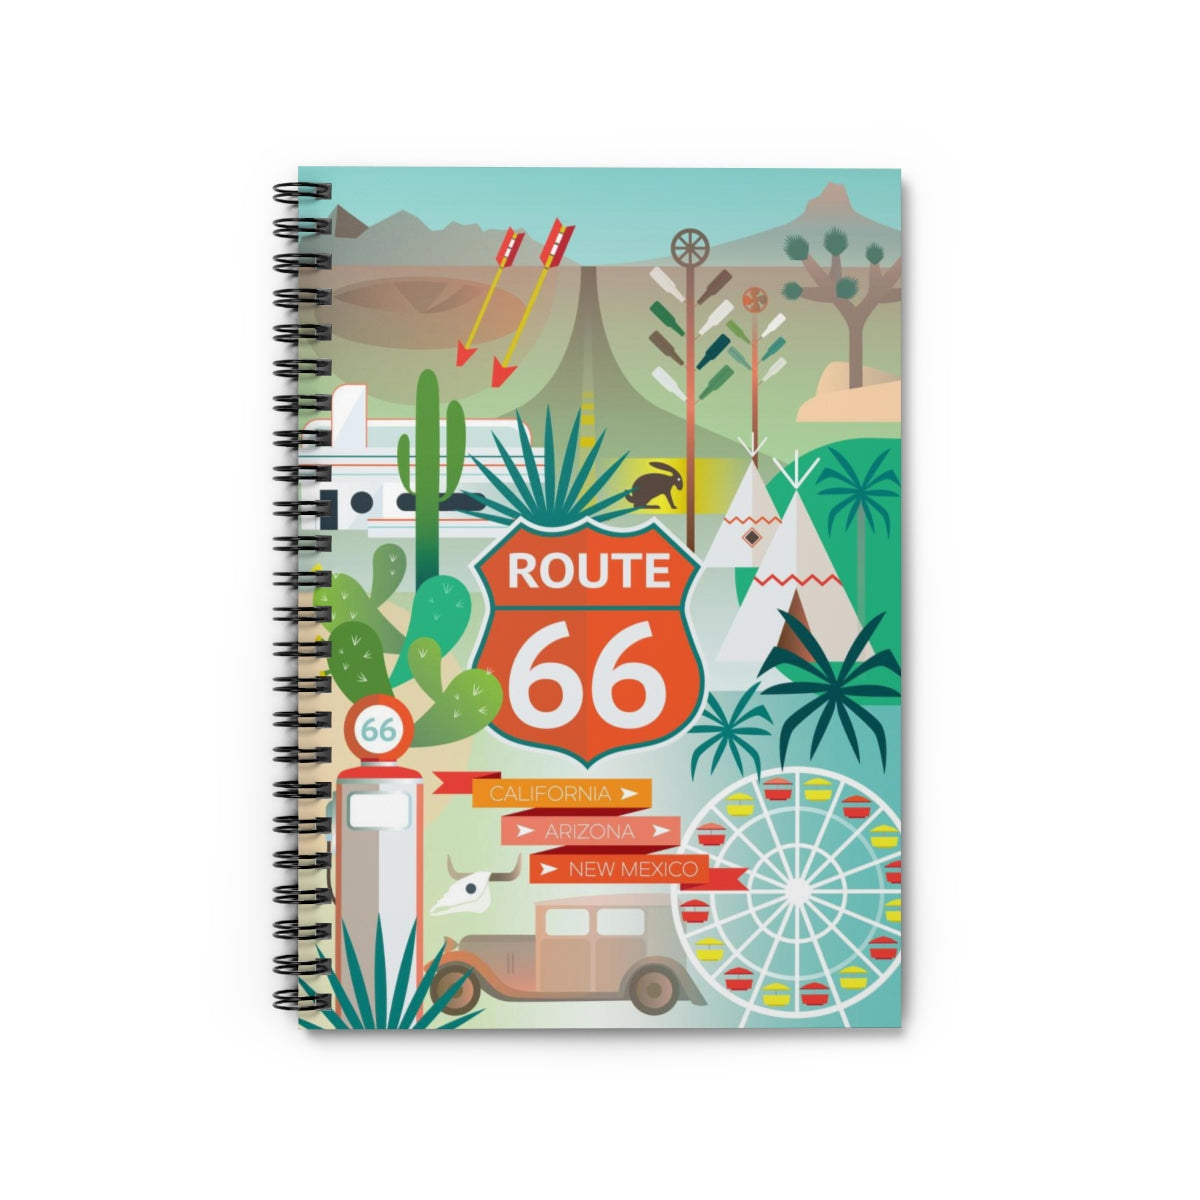 ROUTE 66 JOURNAL